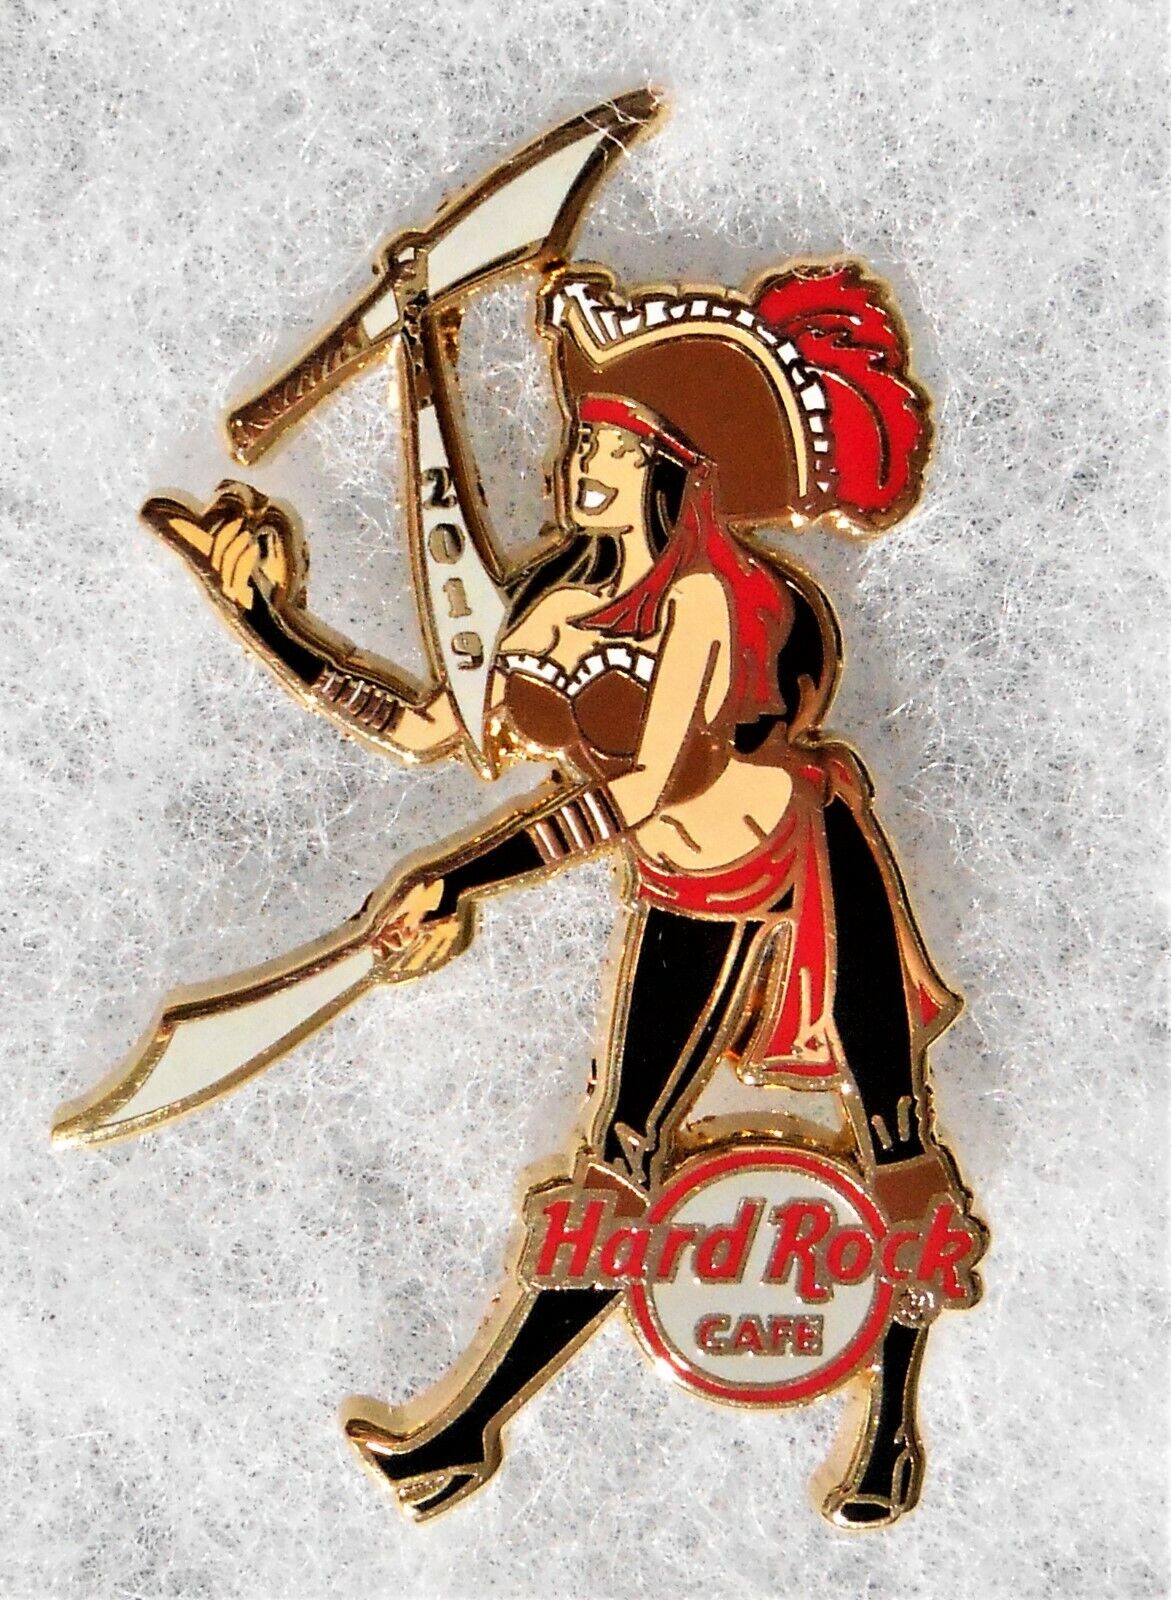 HARD ROCK CAFE ONLINE TWISTED CIRCUS KNIFE JUGGLER SEXY PIRATE GIRL PIN # 516100